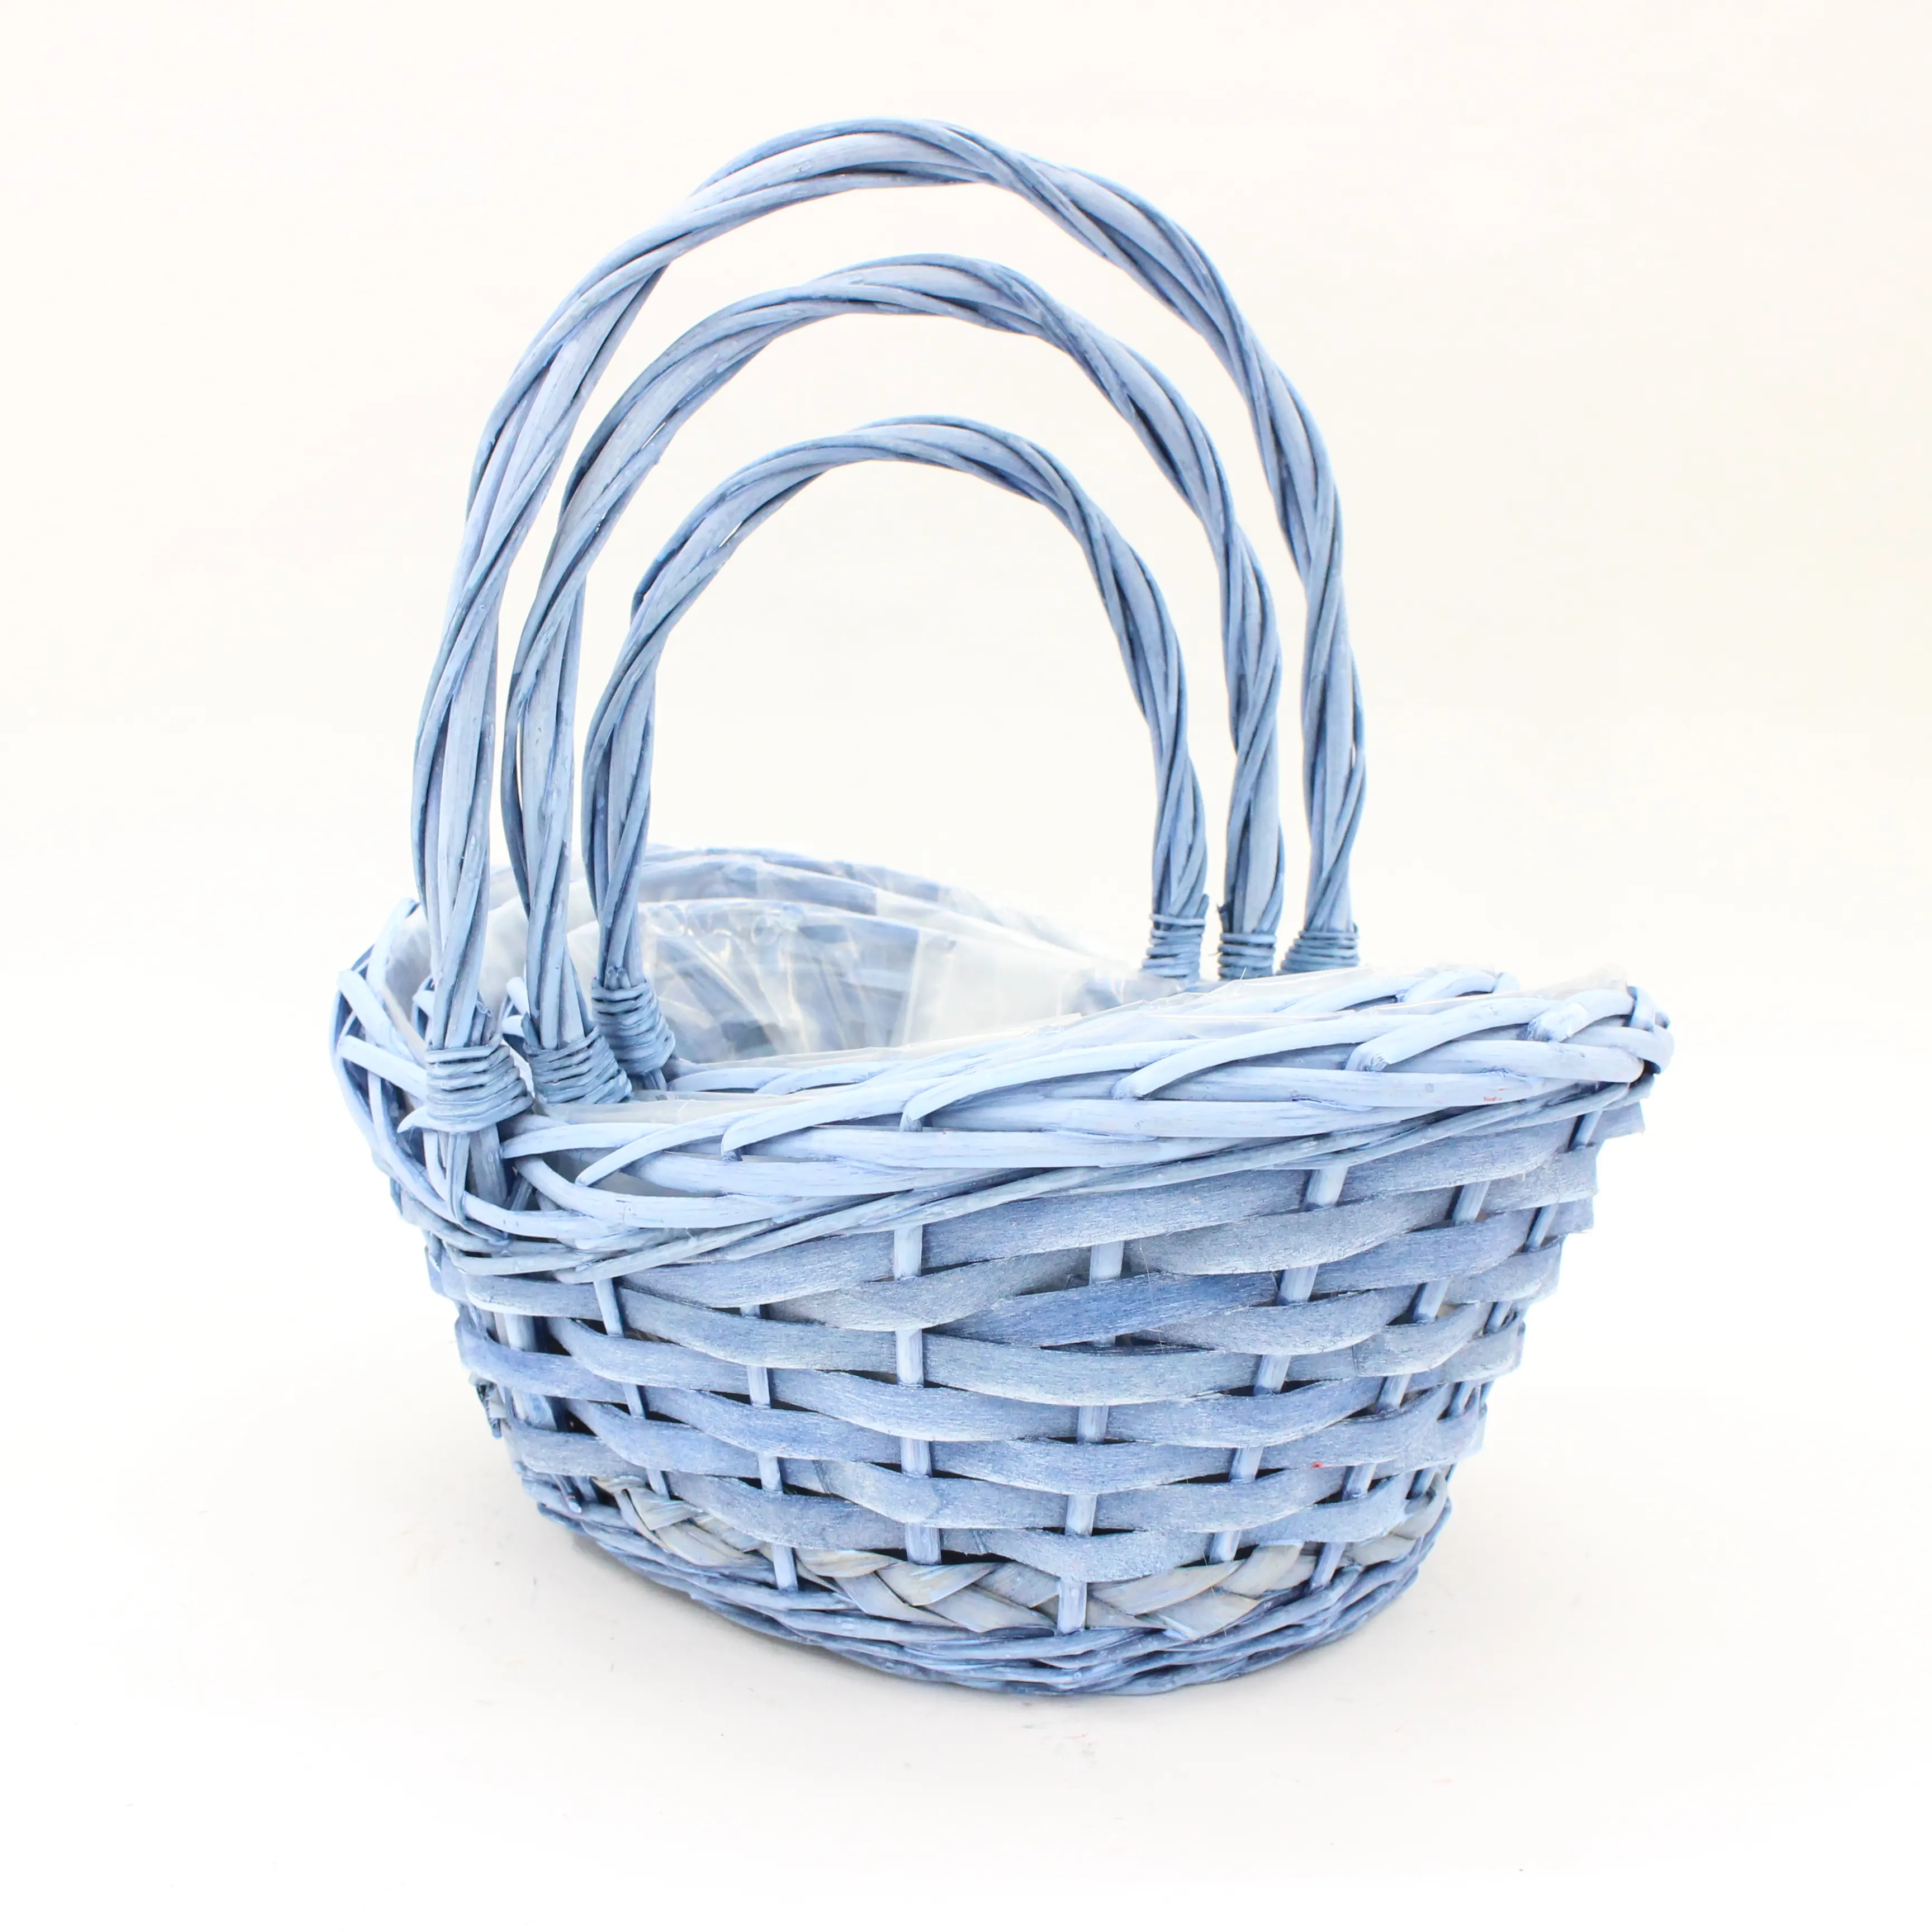 Newly designed bright blue hand woven flower basket with waterproof lining